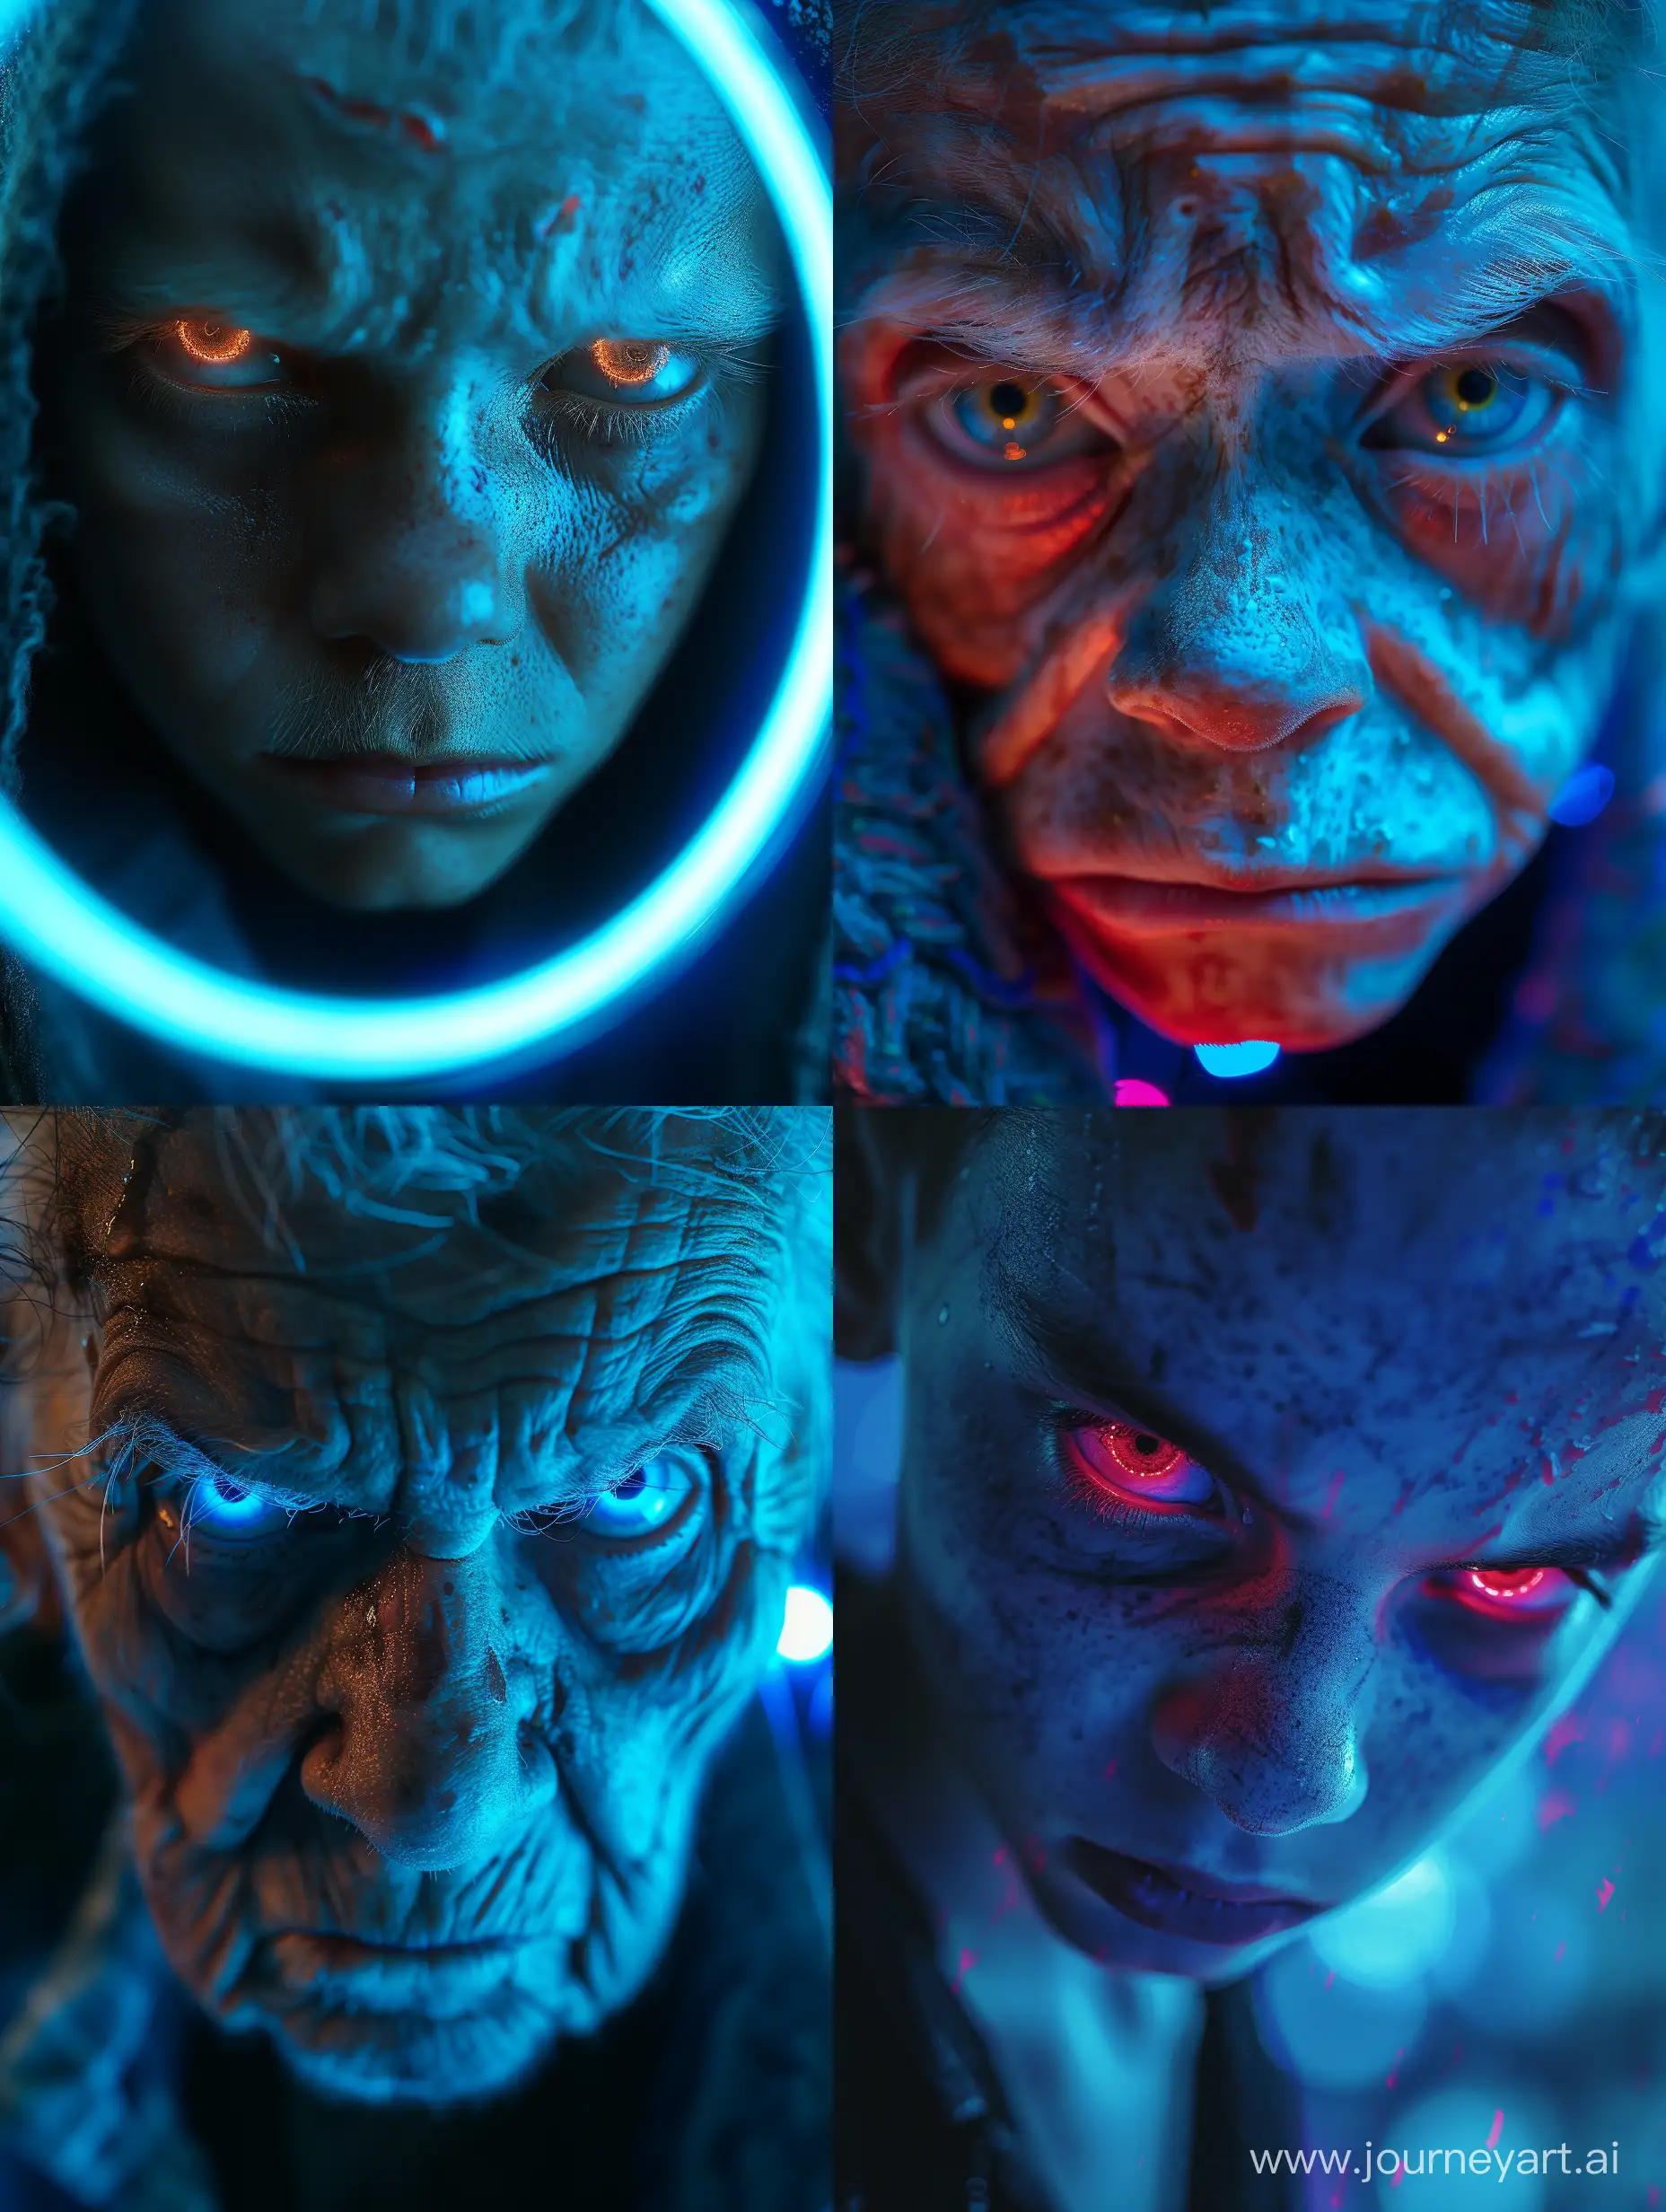 Dramatic-Fashion-Portrait-Intensely-Expressive-Old-Child-in-Neon-Blue-Light